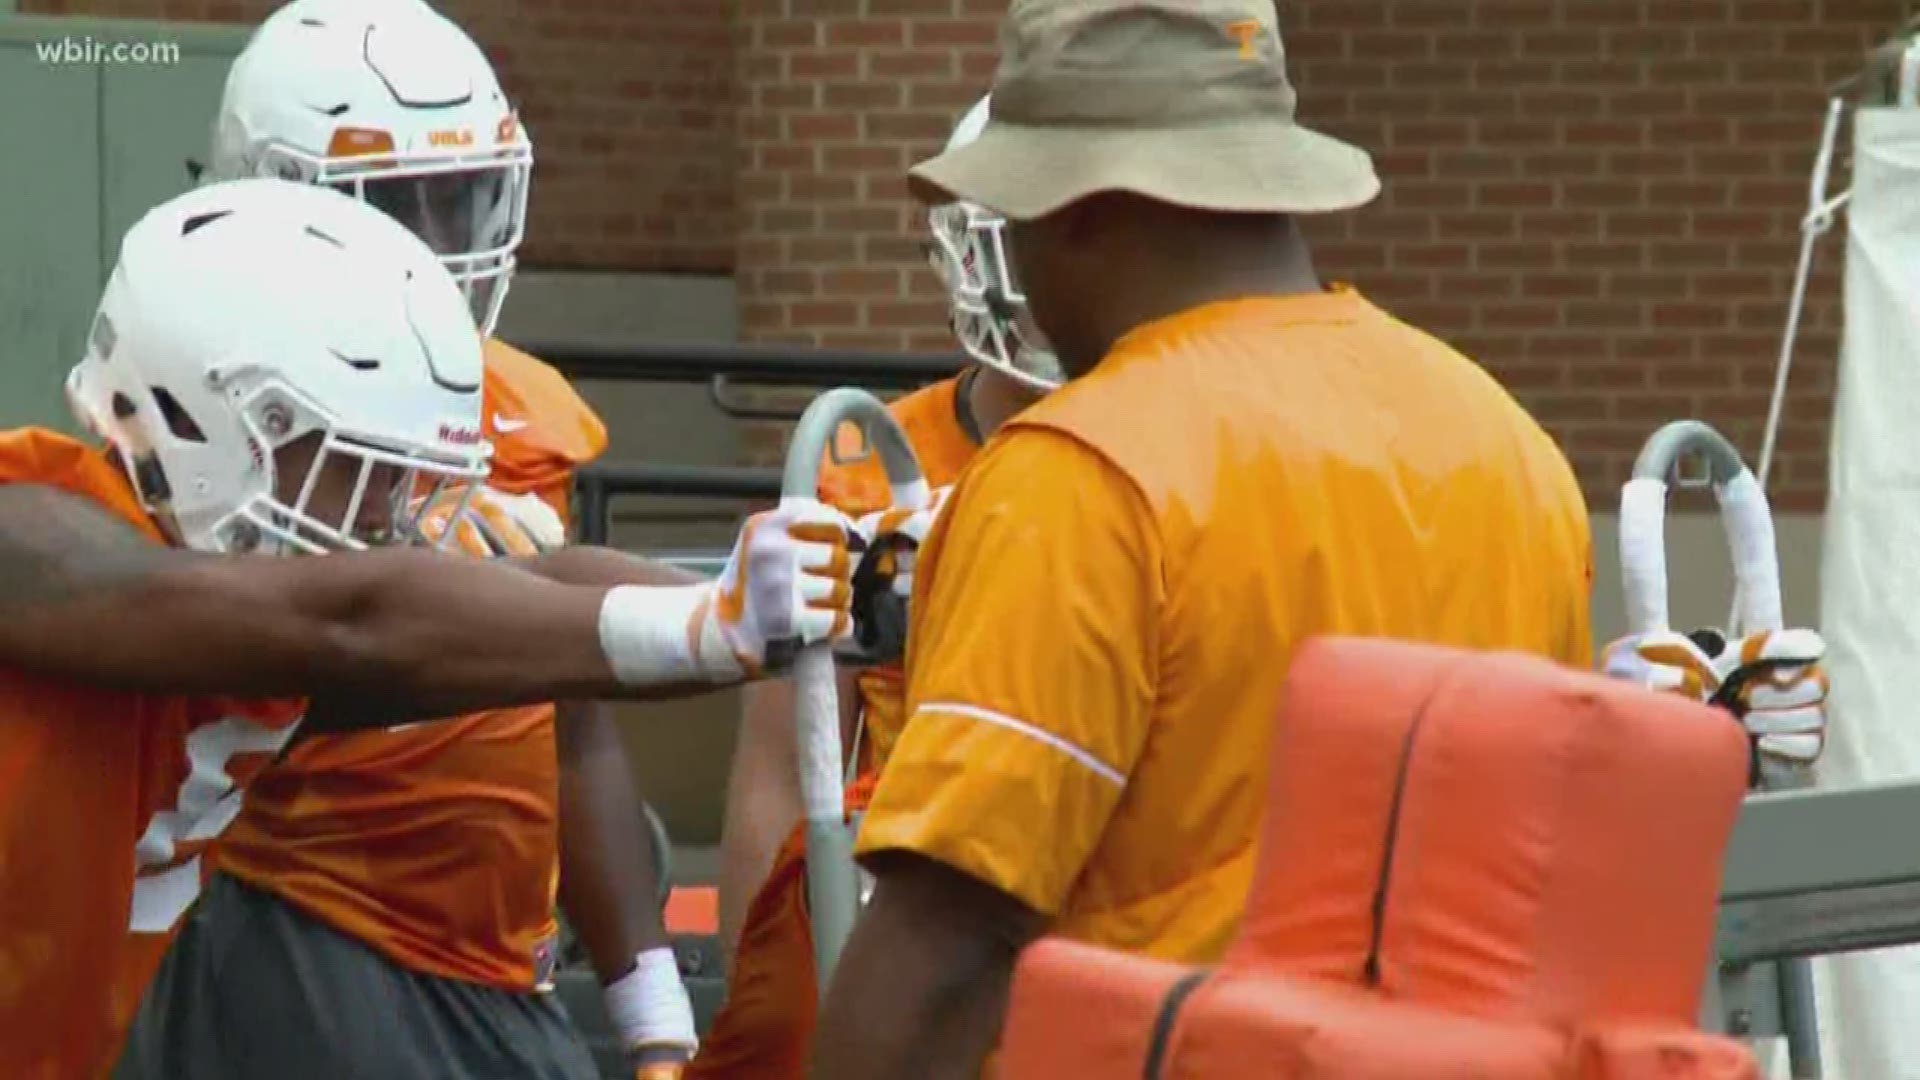 GoVols247's Wes Rucker joins us to discuss the first two days of fall camp for Tennessee football.